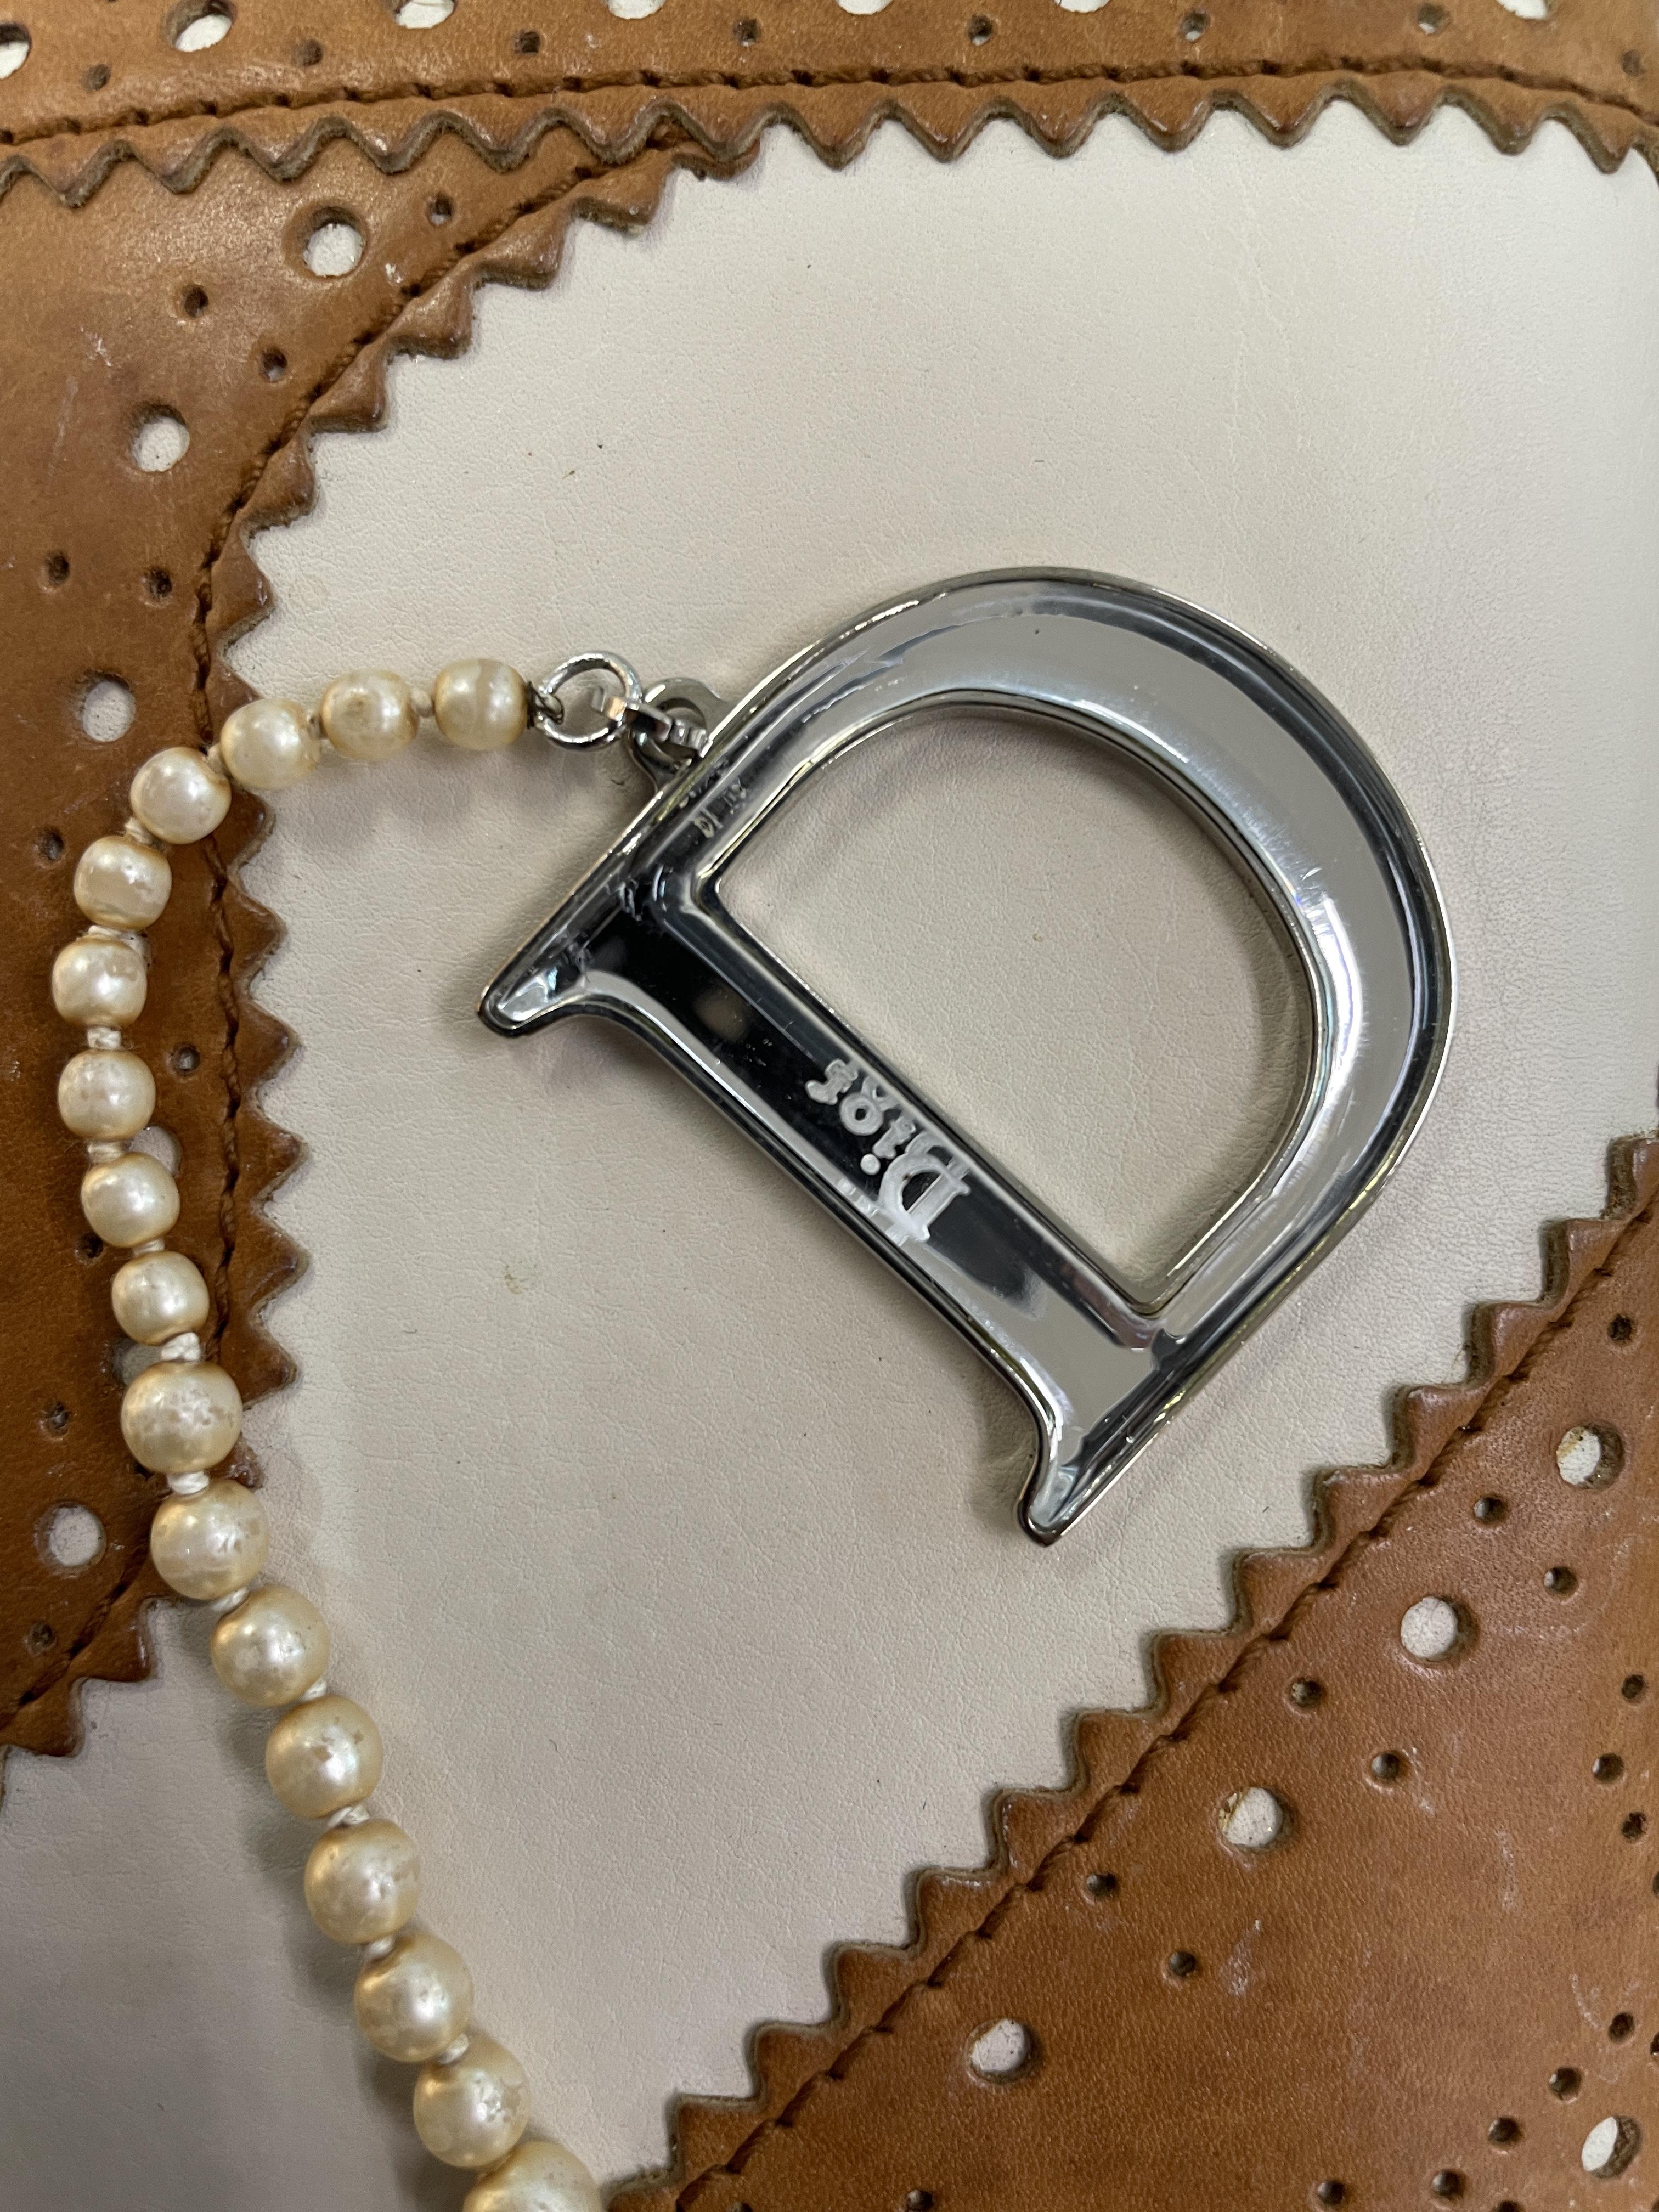 A CHRISTIAN DIOR 'D' TRICK BAG WITH FAUX PEARLS - Image 19 of 22